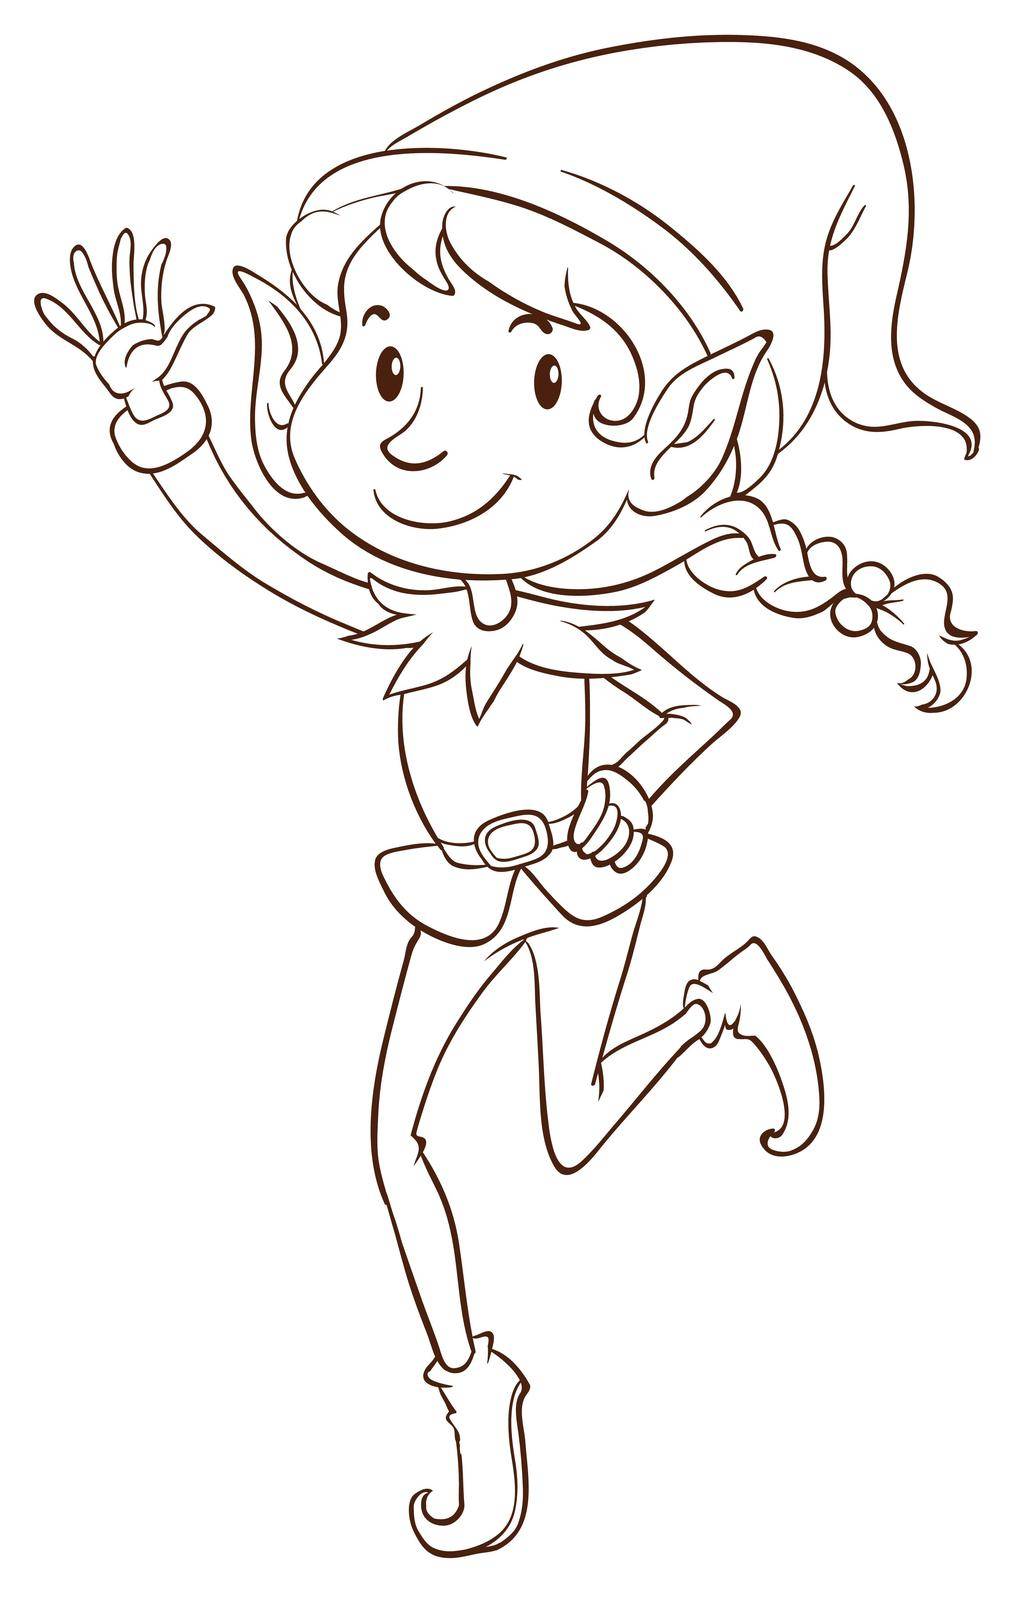 Illustration of a plain drawing of an elf on a white background